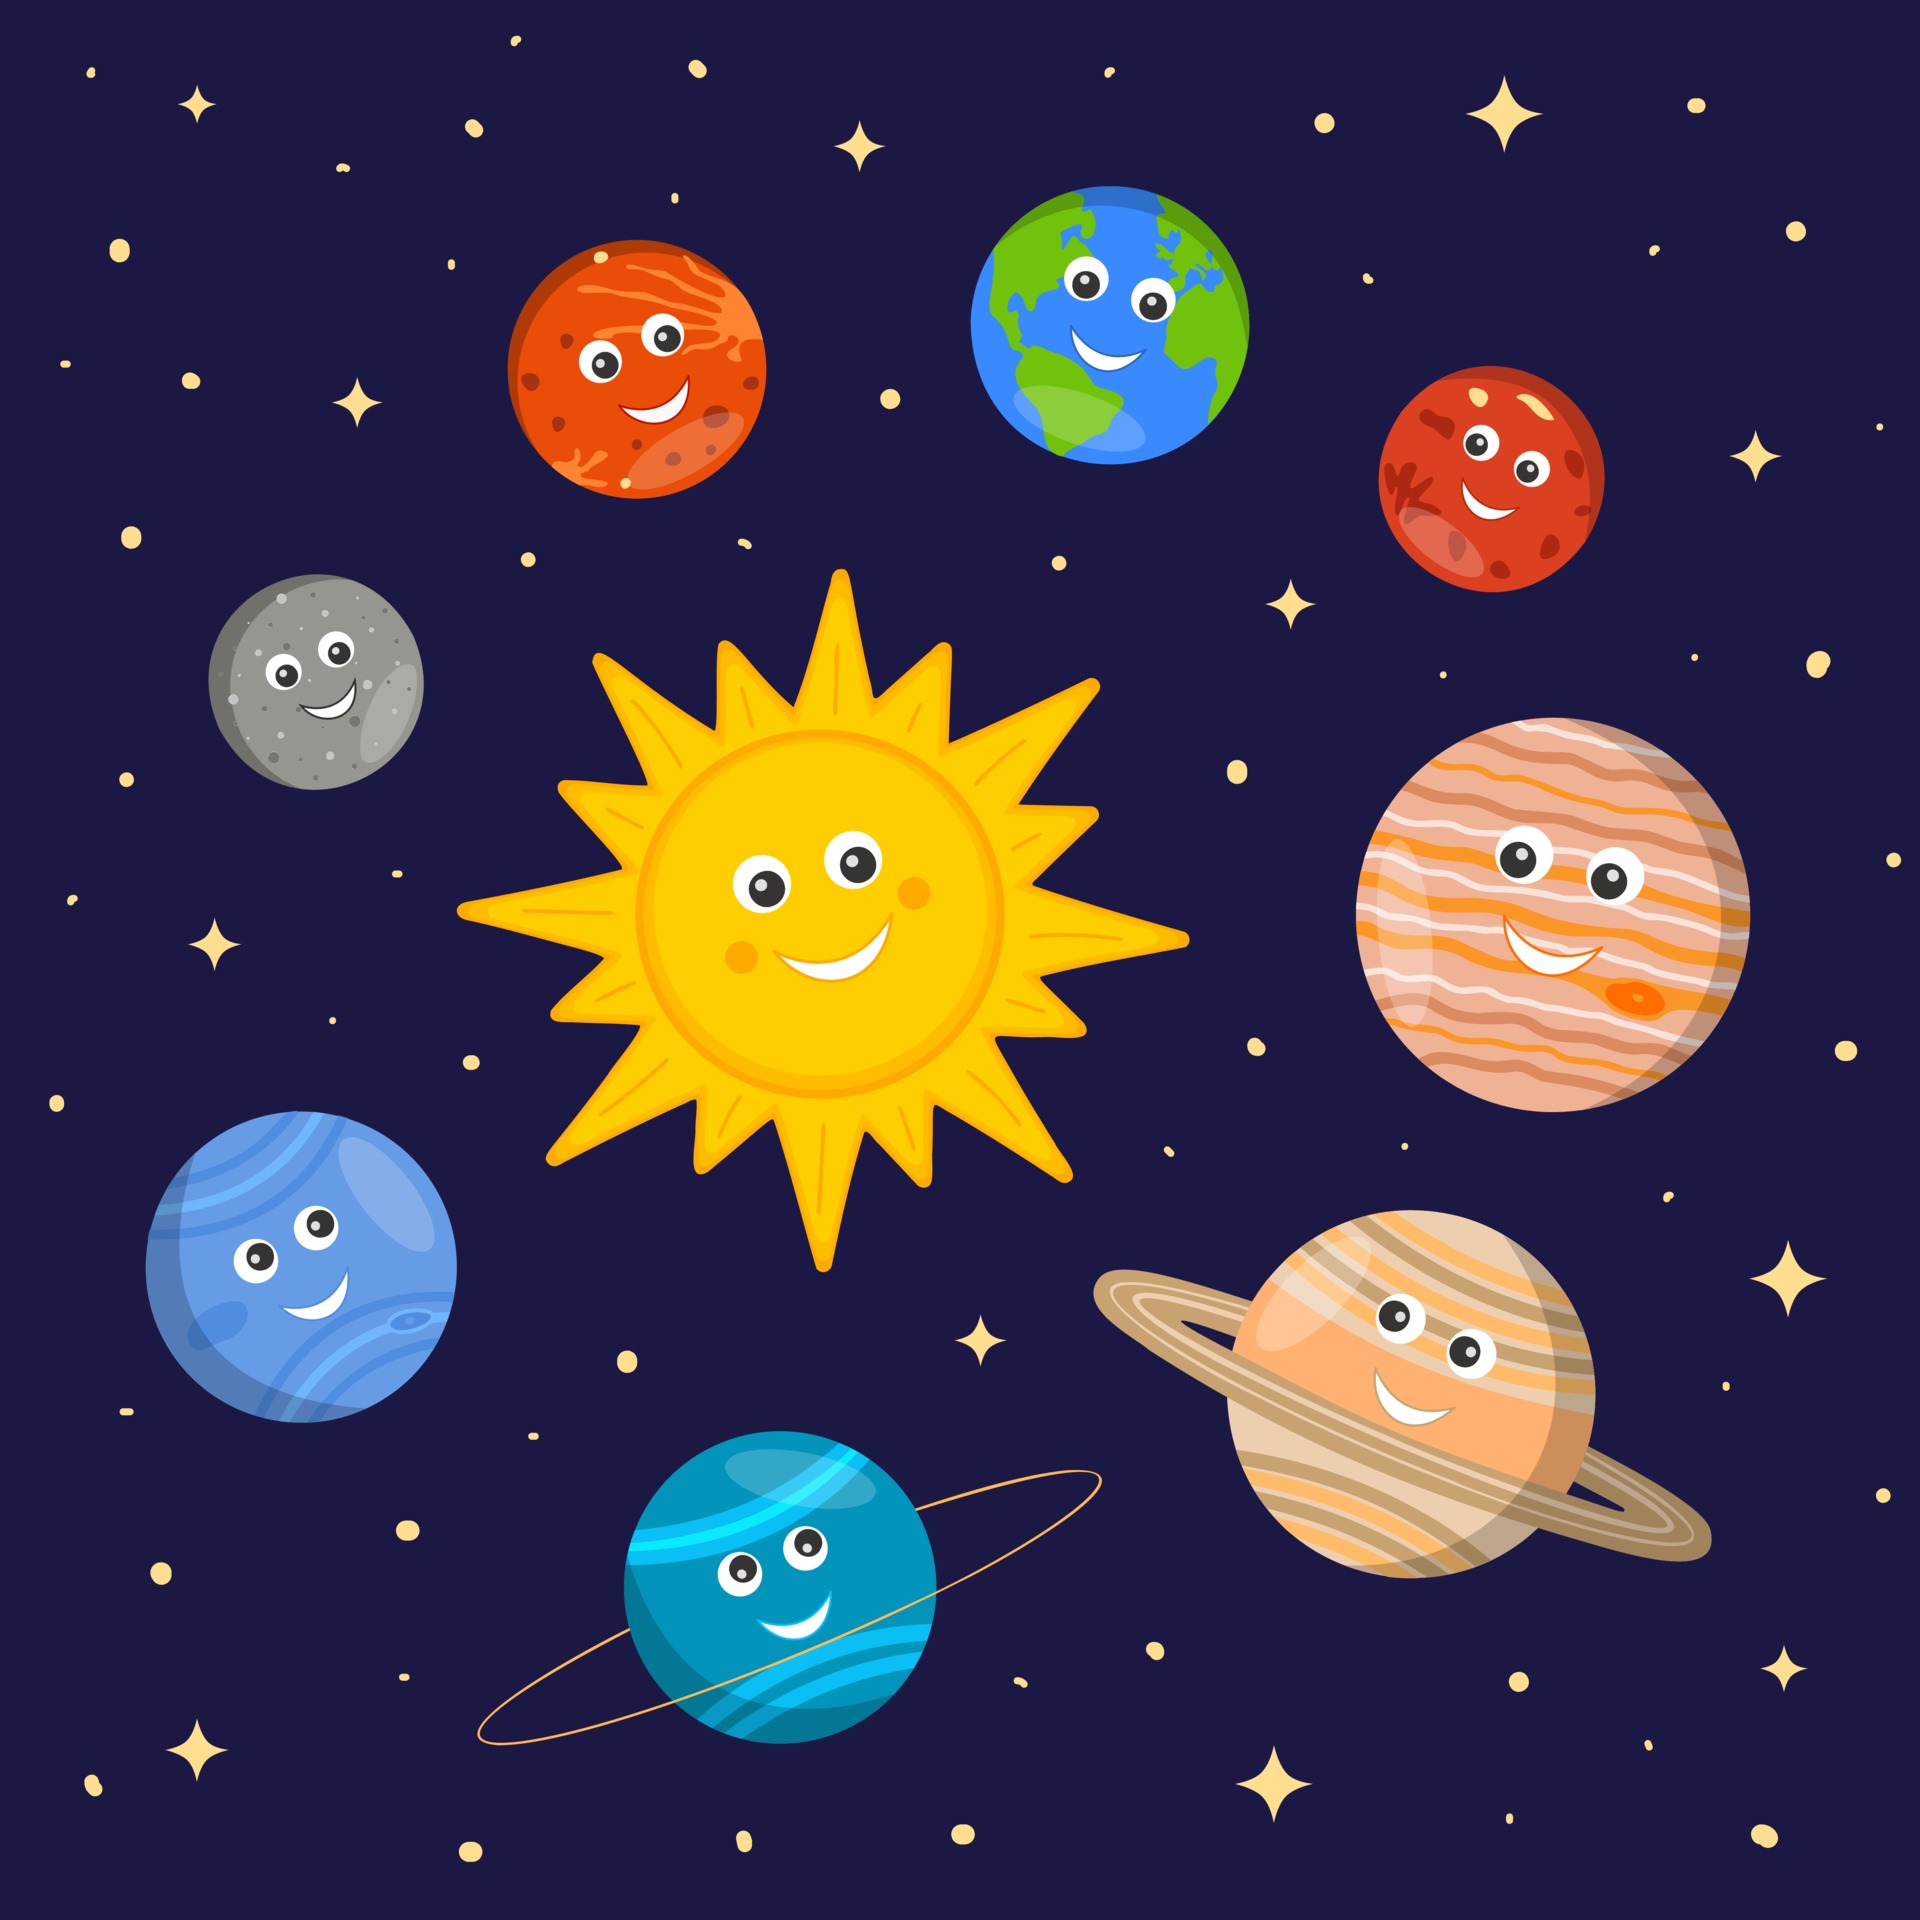 Solar System For Kids Cute Sun And Planets Characters In Cartoon Style On Dark Space Background Vector Illustration For Kindergarten And School Science Education 2143607 Vector Art At Vecteezy